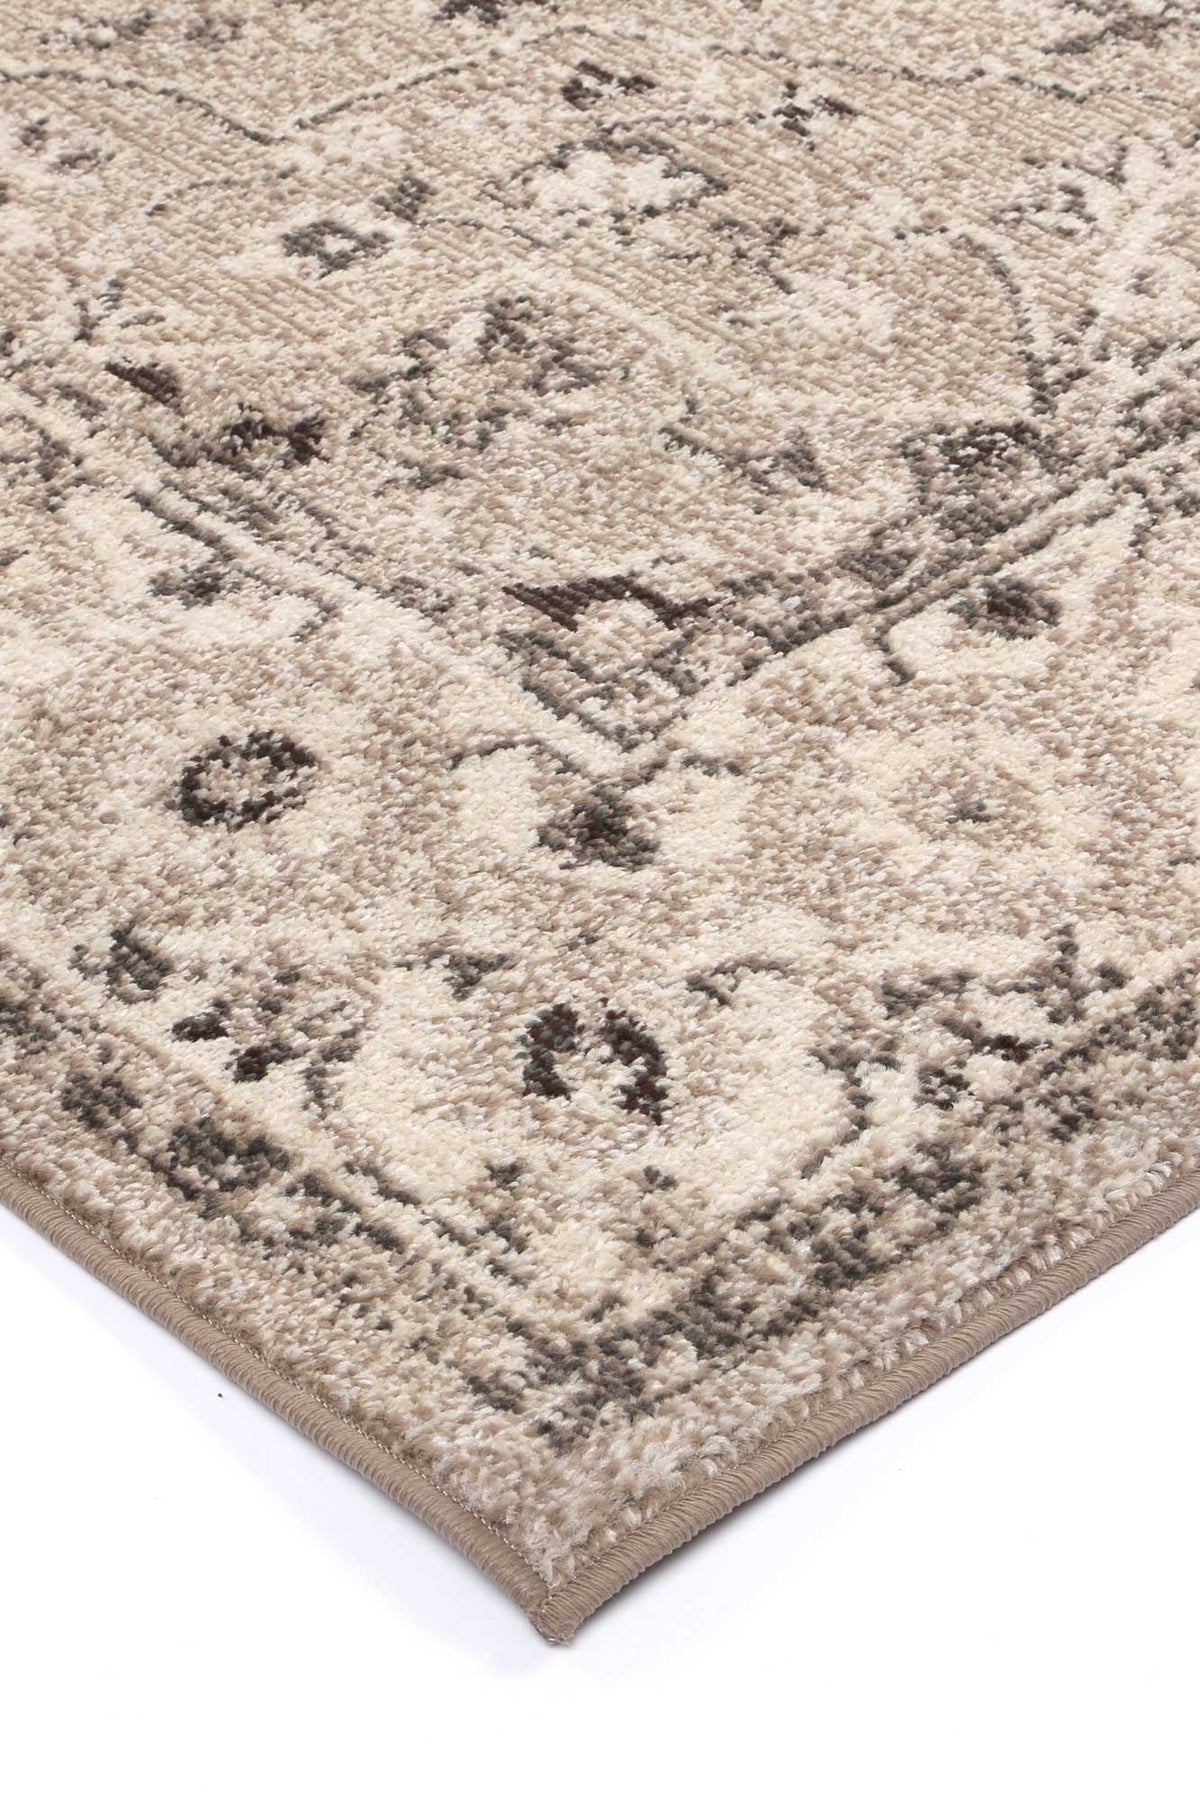 Tulin Beige/White Traditional Rug